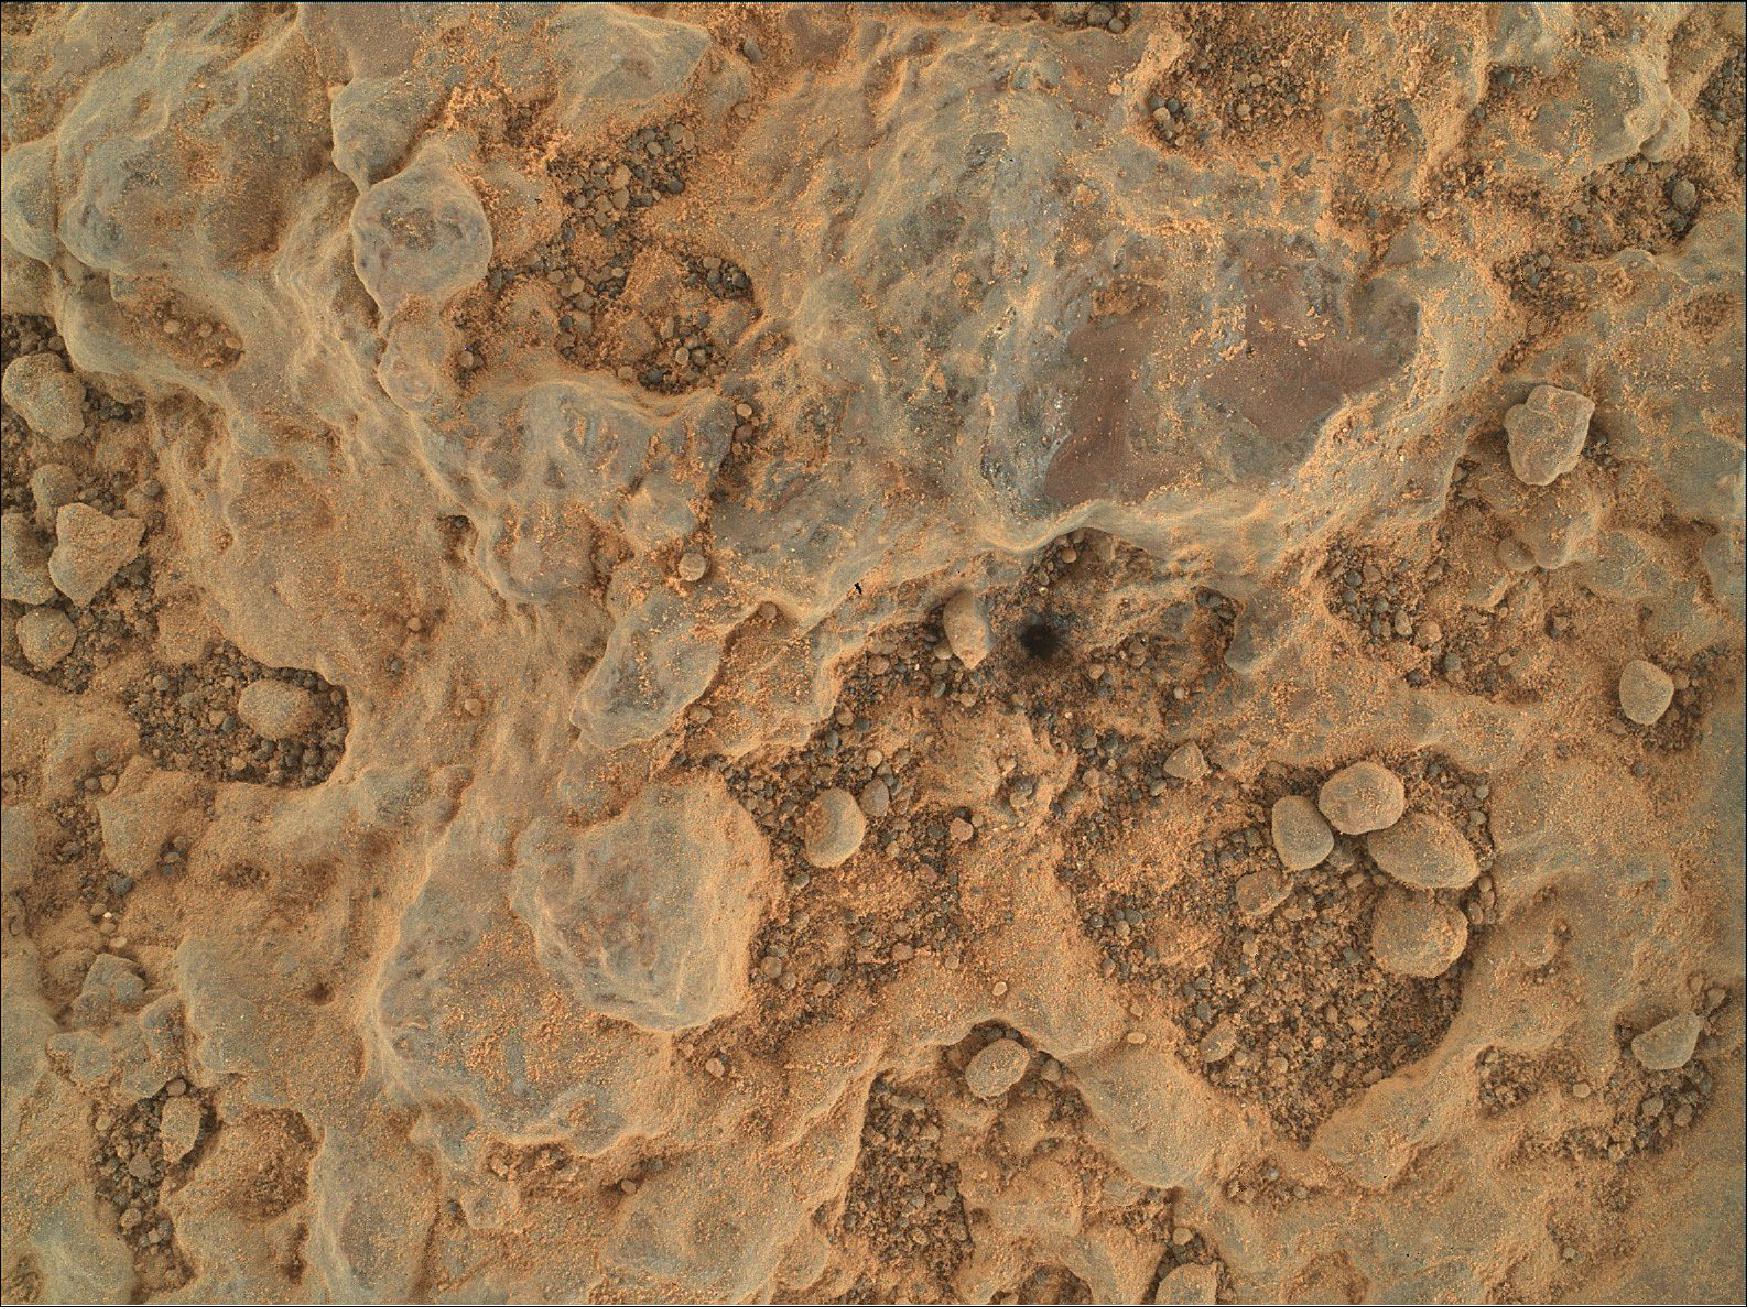 Figure 17: NASA's Perseverance Mars rover took this close-up of a rock target nicknamed "Foux" using its WATSON camera on the end of the rover's robotic arm. The image was taken July 11, 2021, the 139th Martian day, or sol, of the mission (image credit: NASA/JPL-Caltech/MSSS)